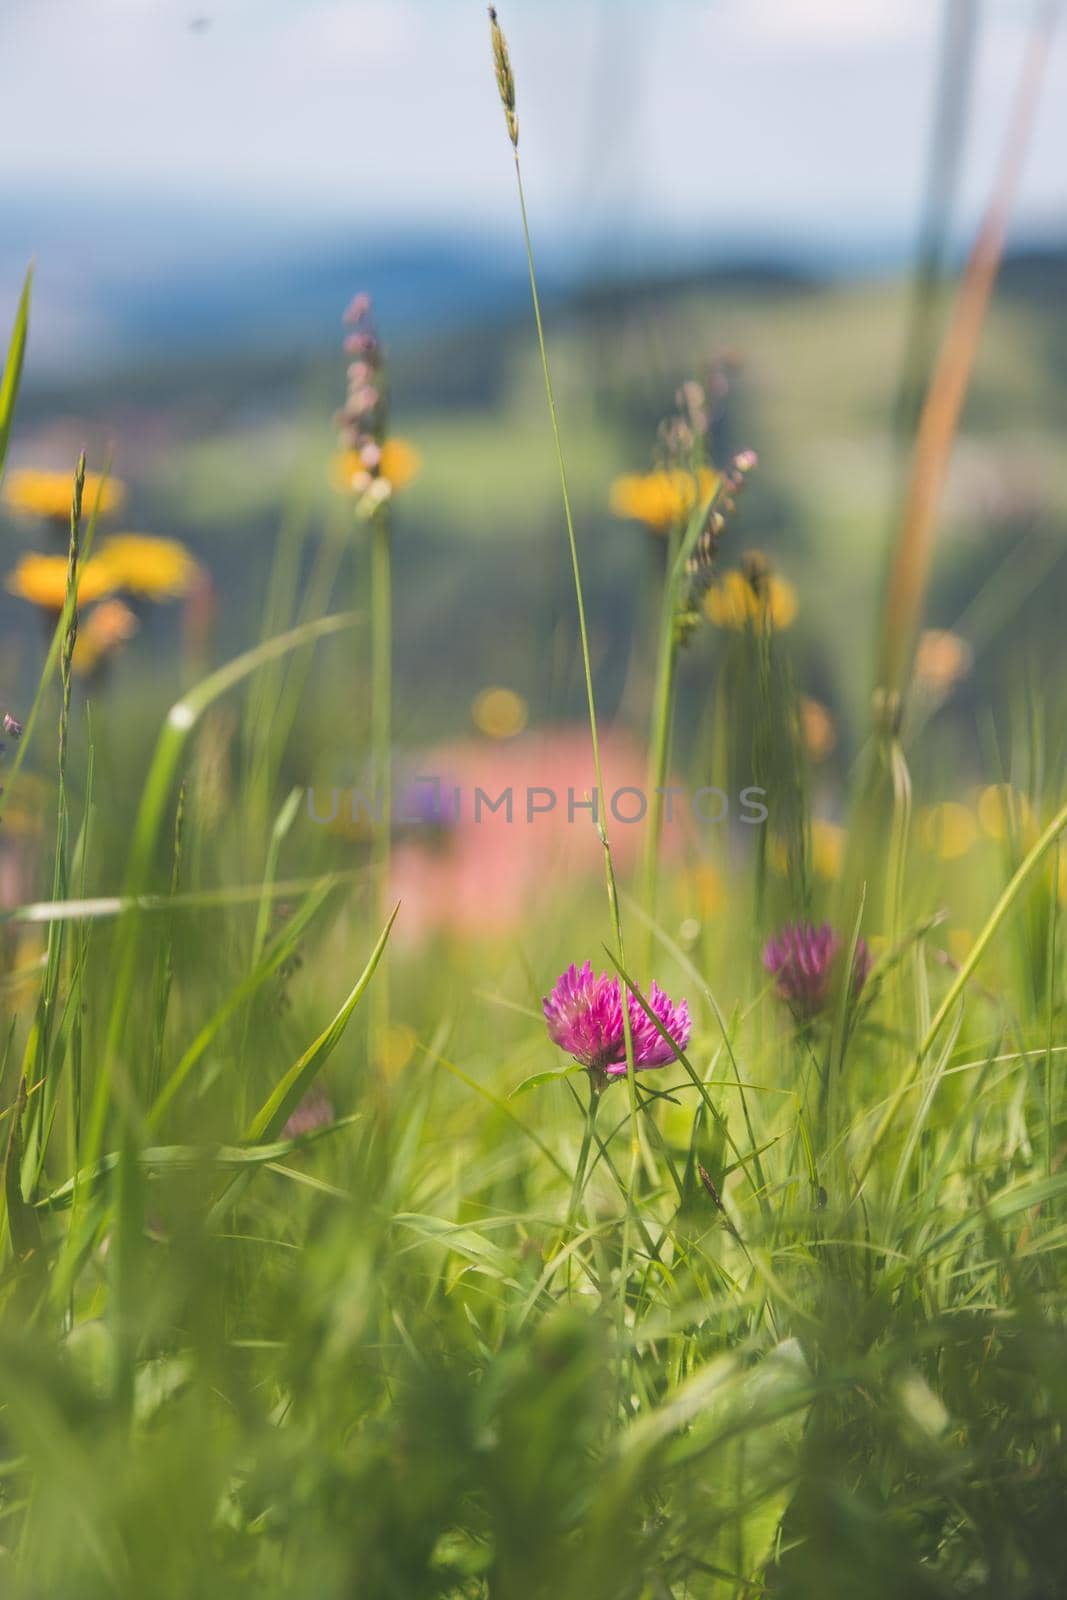 Hiking holiday concept: Cute fresh flowers in spring, colorful summer wildflowers meadow by Daxenbichler